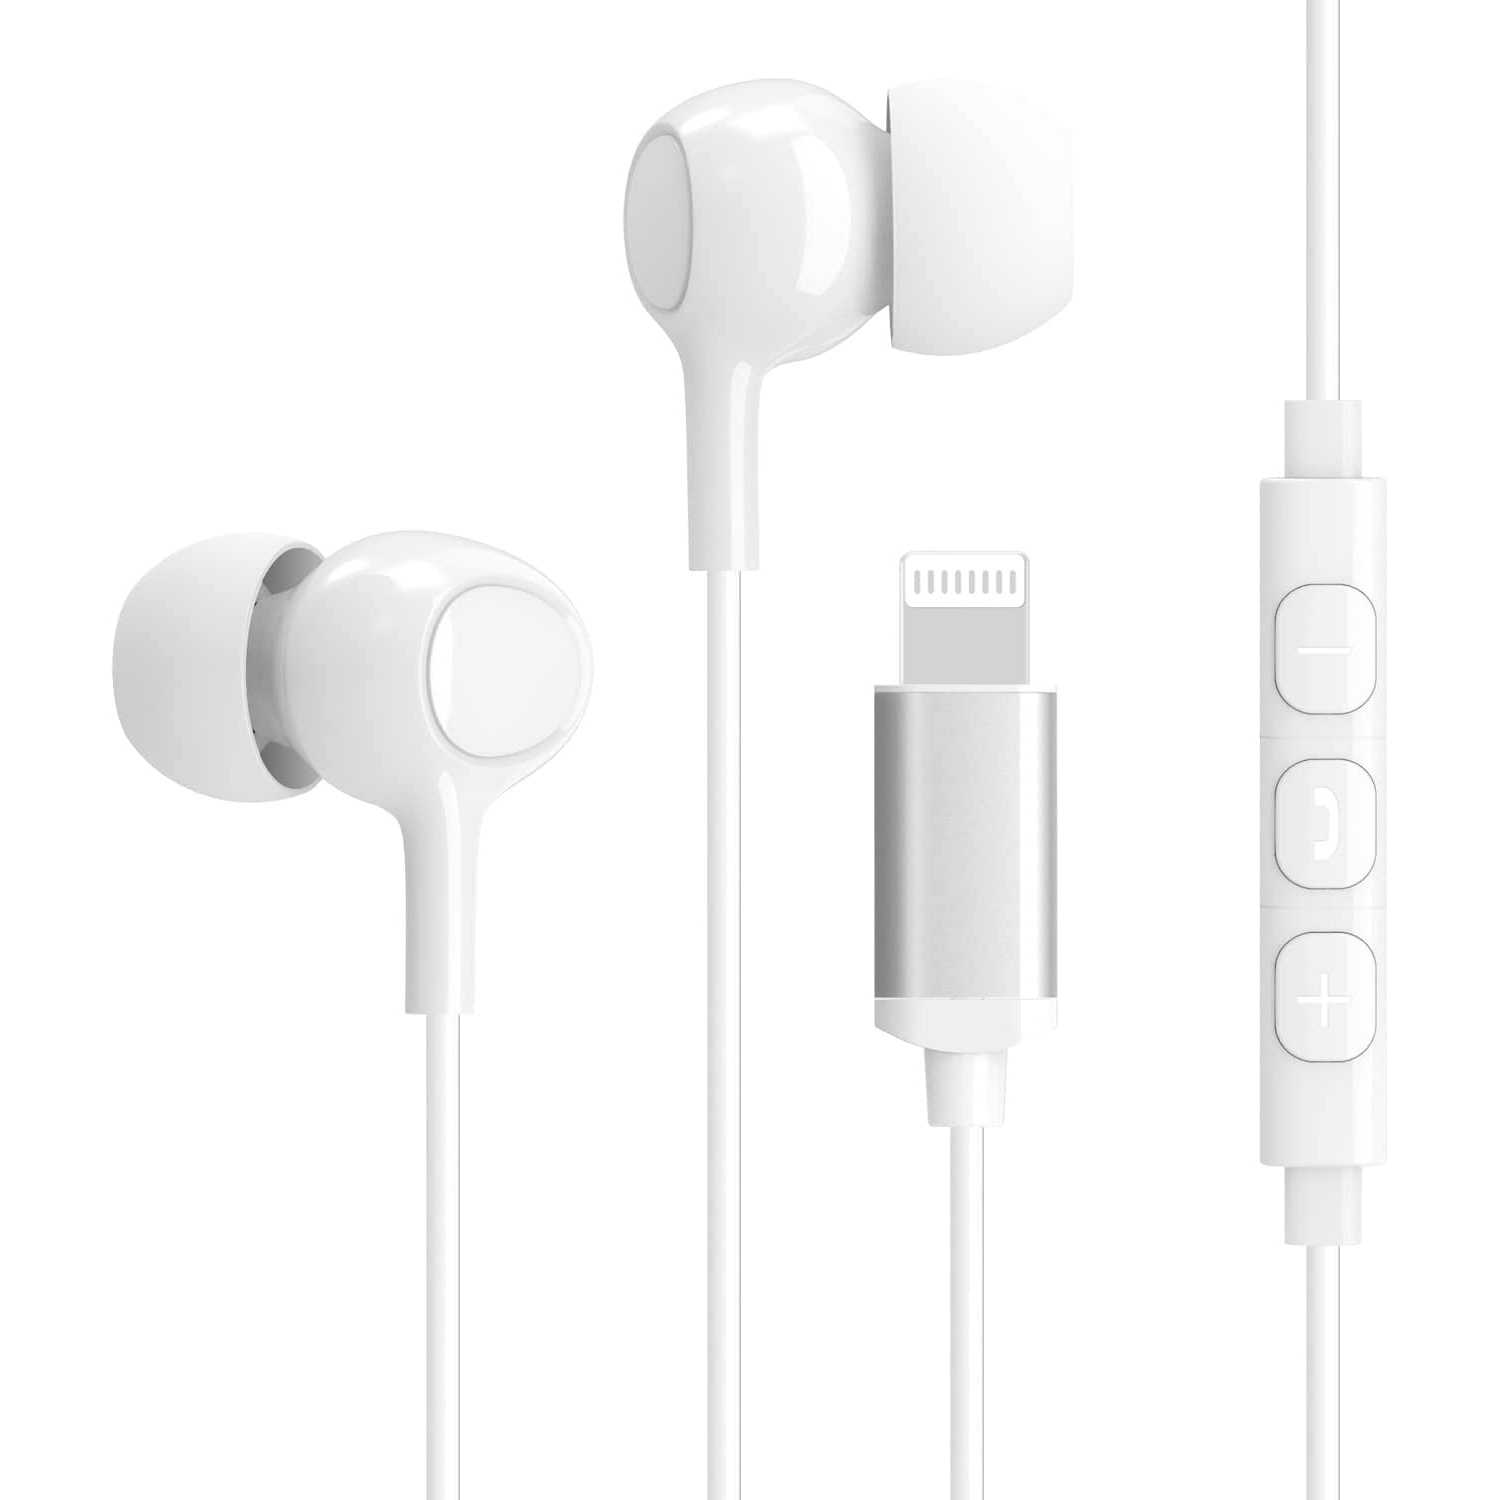 Dolaer aceyoon iPhone Earphones MFi Certified Lightning Earbuds with Mic and Volume Remote iPhone 11 Headphones Noise Cancelling Universe Lightning Earphones for iPhone 12 13 X XR